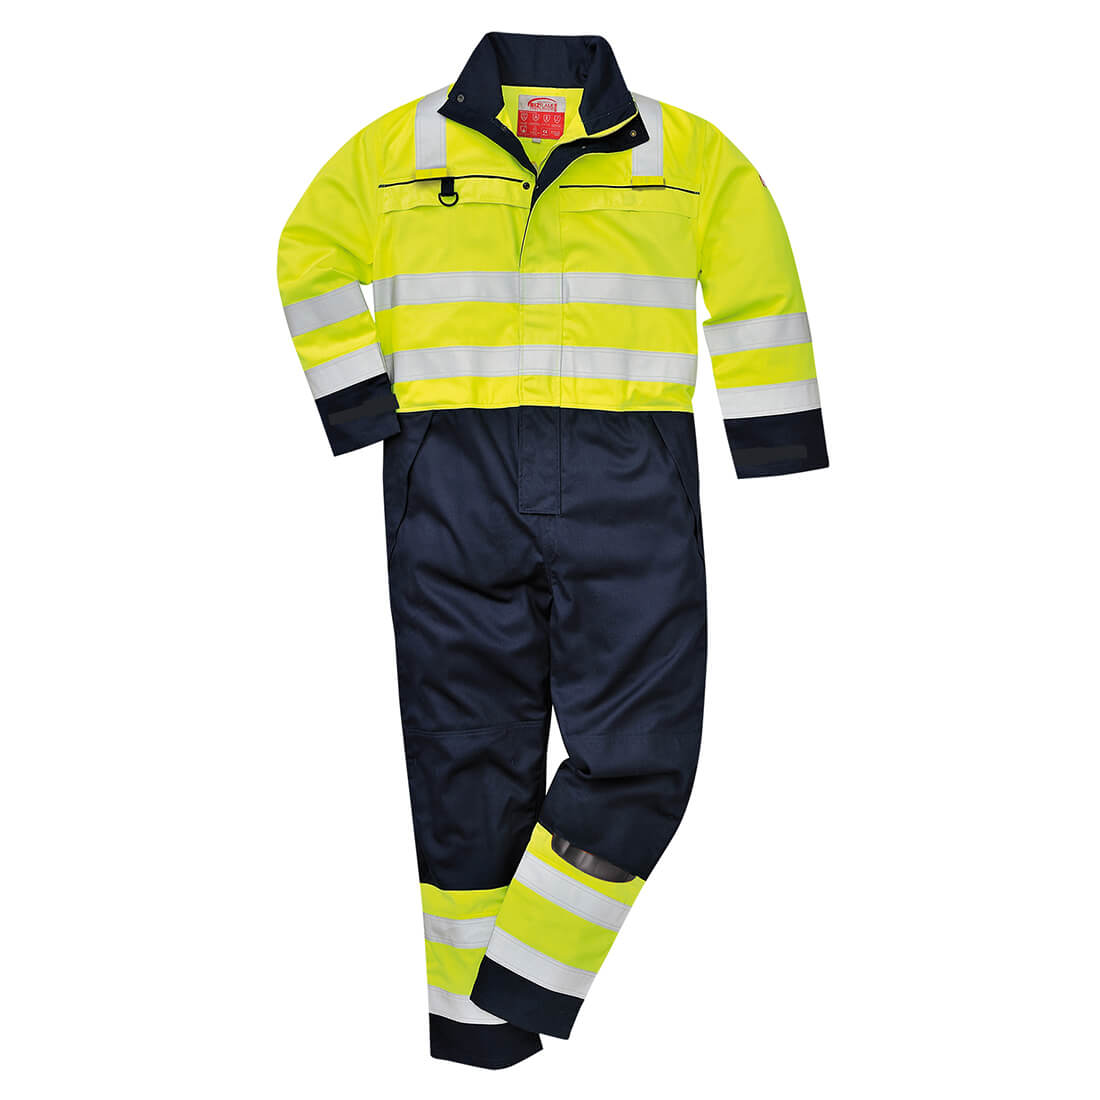 Image of Biz Flame Hi Vis Multi-Norm Flame Resistant Coverall Yellow / Navy 2XL